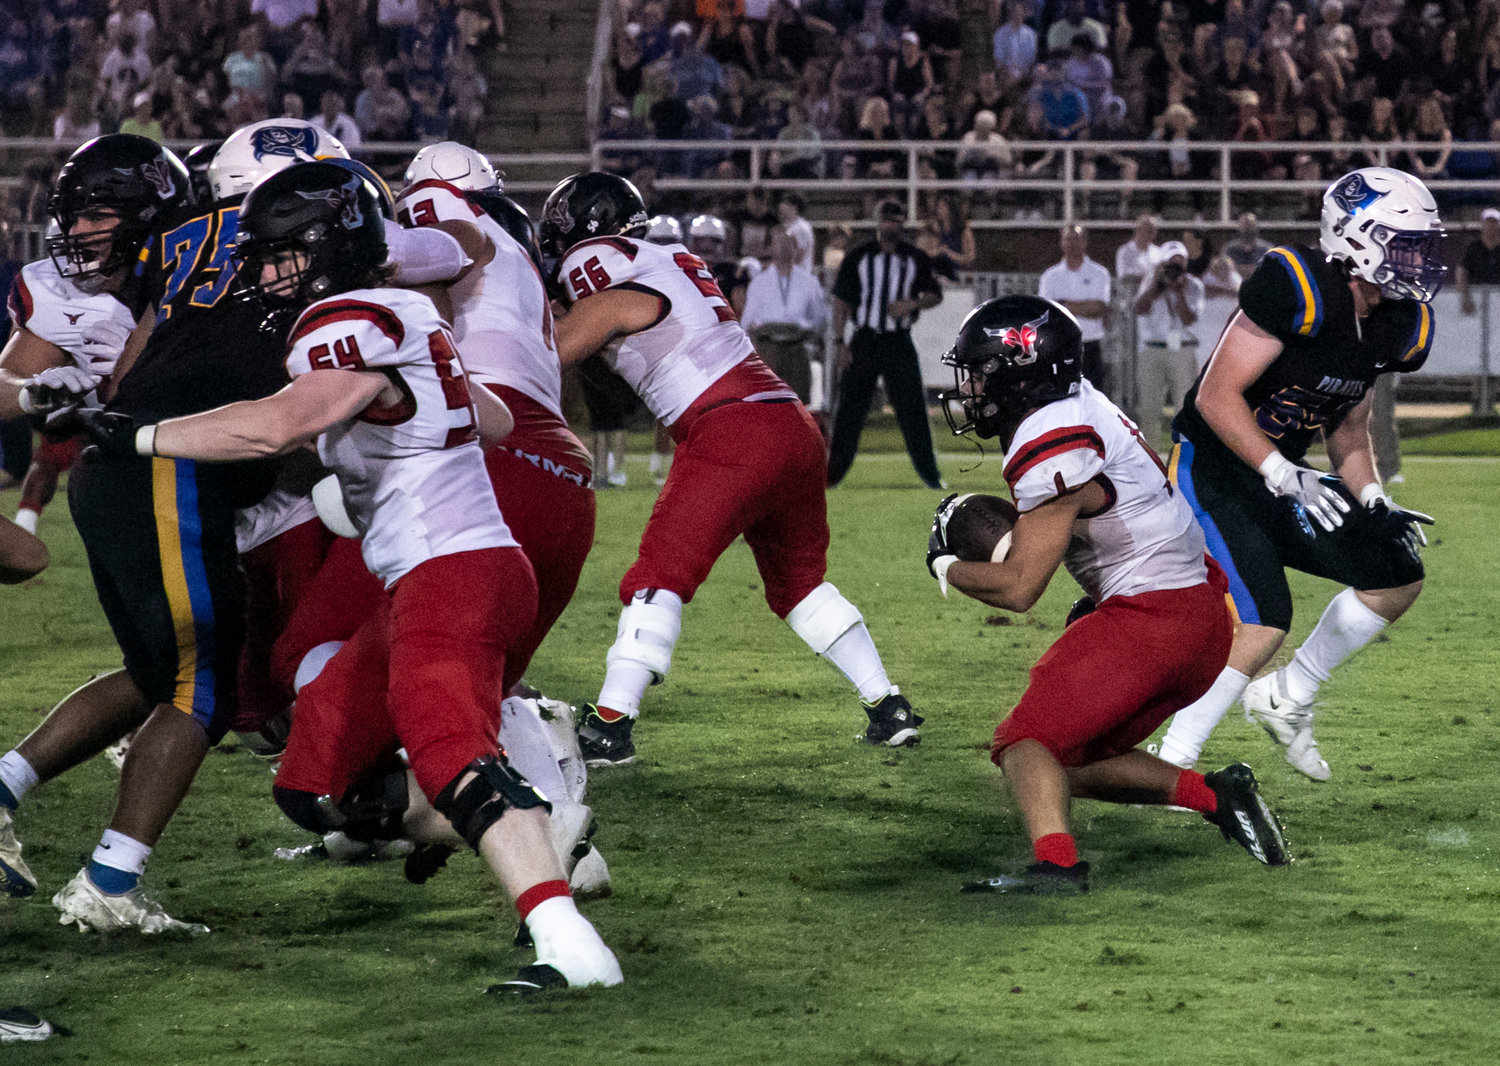 Toro senior Jacob Godfrey (1) looks for running room during Spanish Fort’s season-opening game against Fairhope Aug. 16 on W. C. Majors Field. Godfrey provided the first touchdown as part of the Toros’ 16-6, region-opening win over the Blount Leopards on the road last Friday.